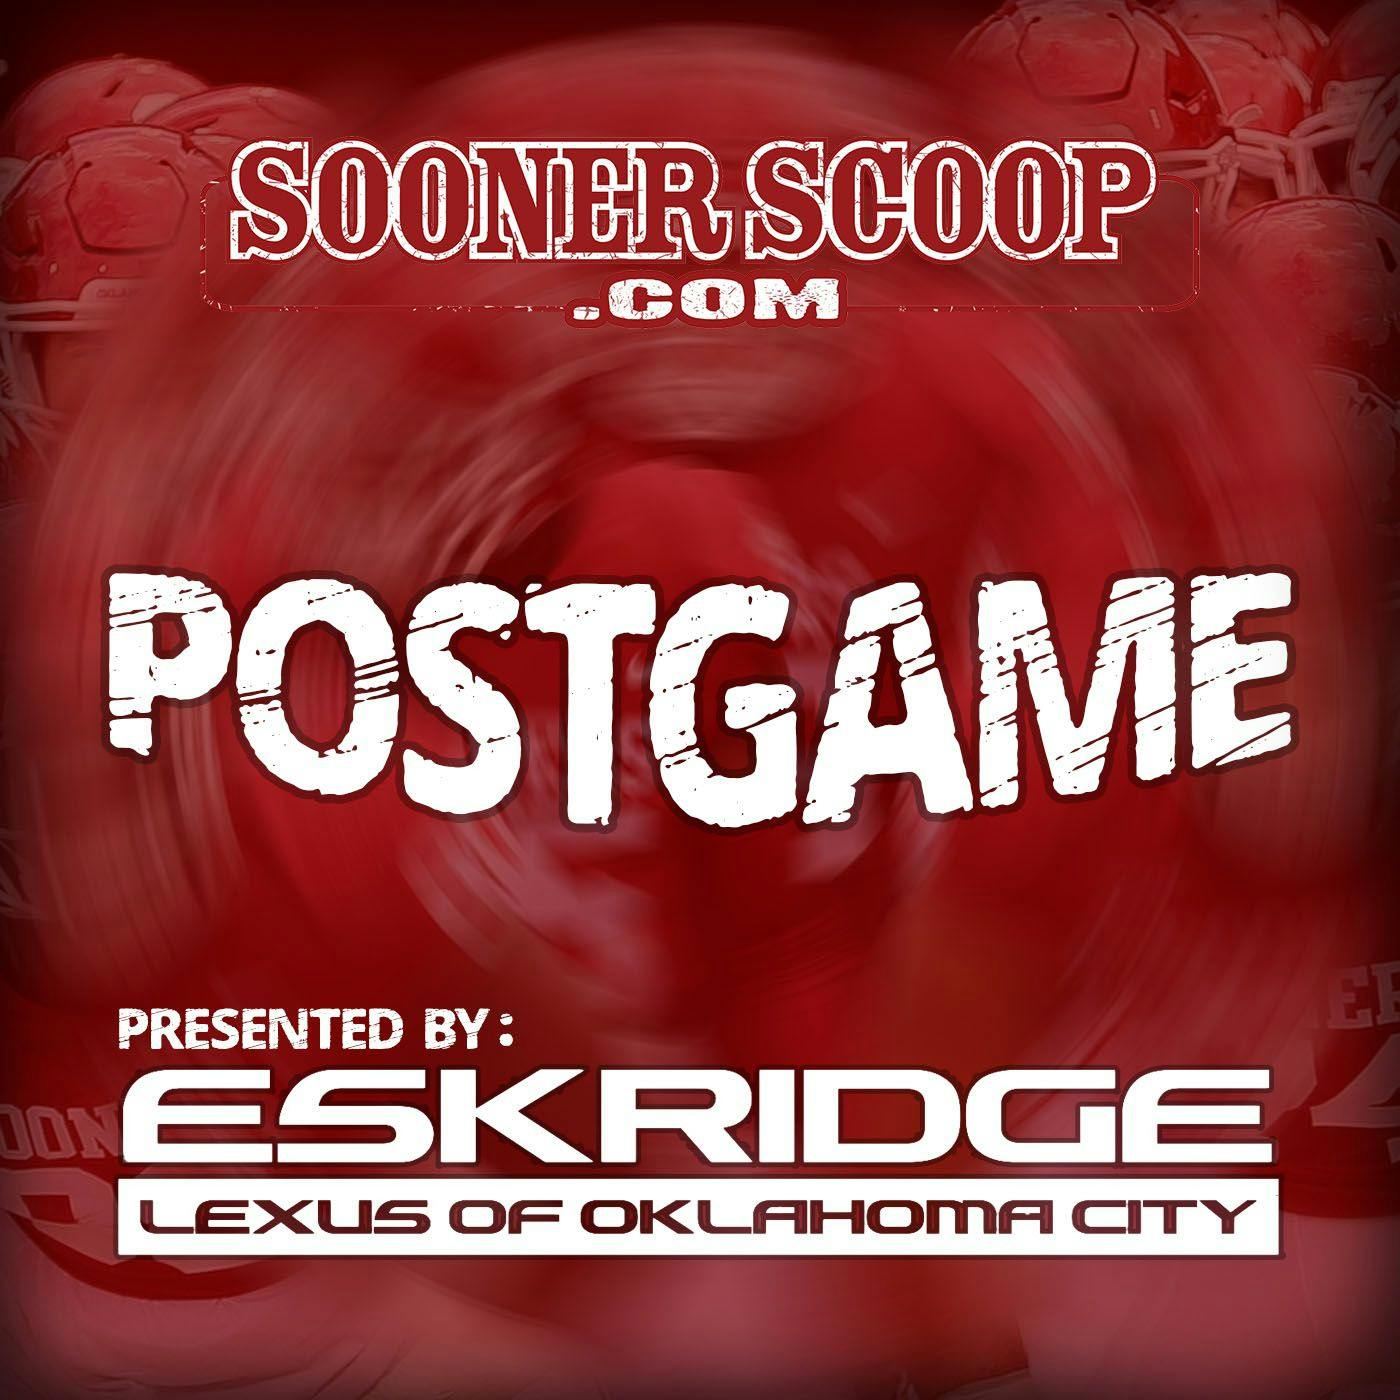 Postgame: Not what we expected in the opener. OU beats Tulane 40-35